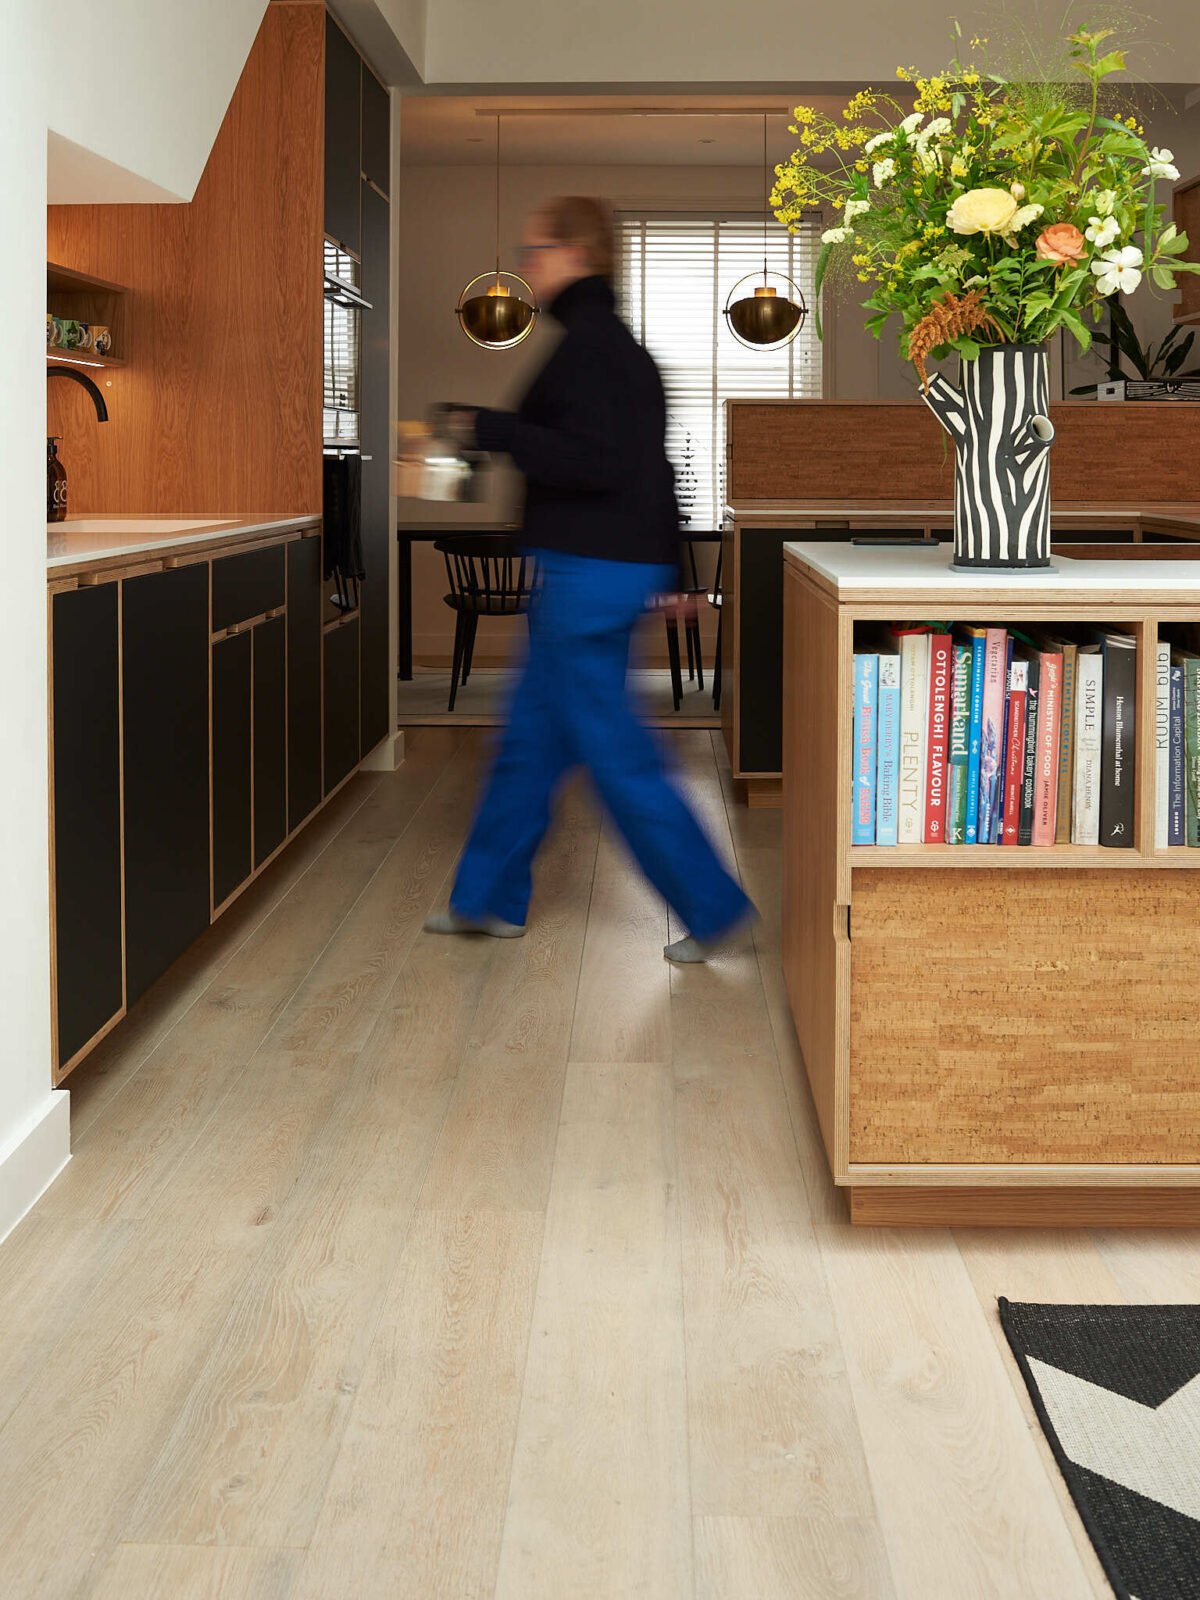 cool blonde oak floor in kitchen with person